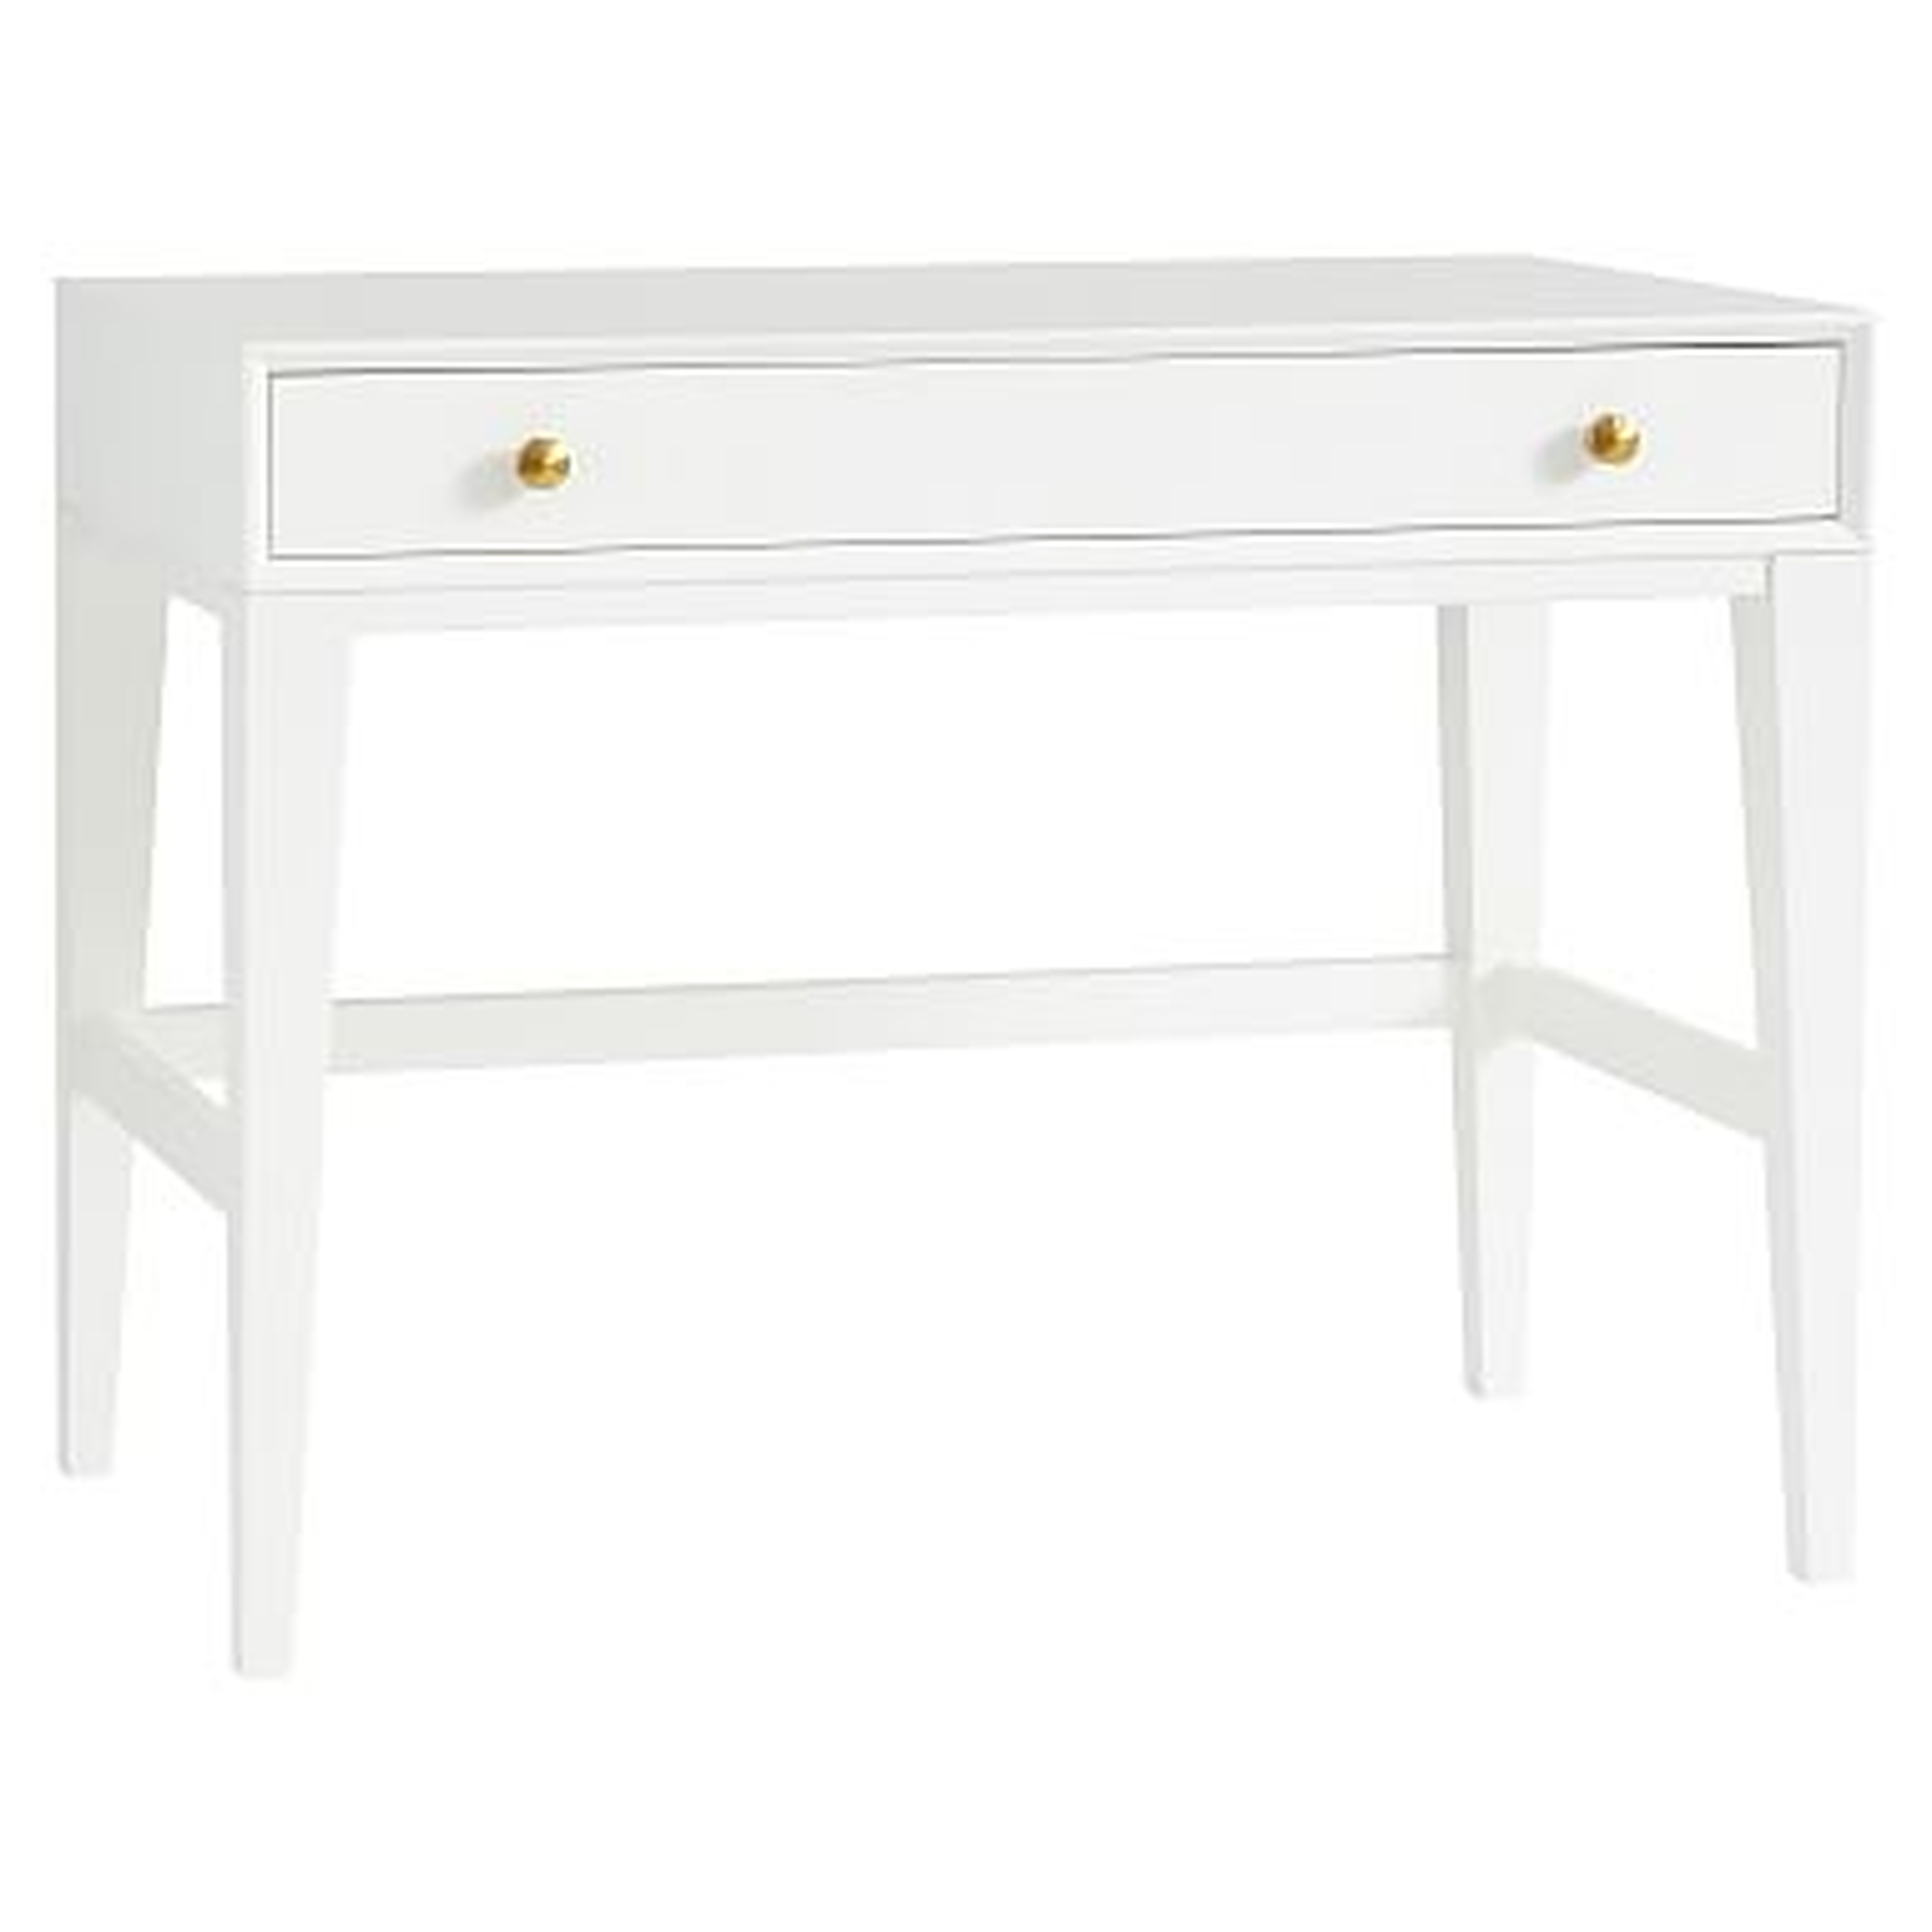 Amelia Small Space Desk, Simply White - Pottery Barn Teen